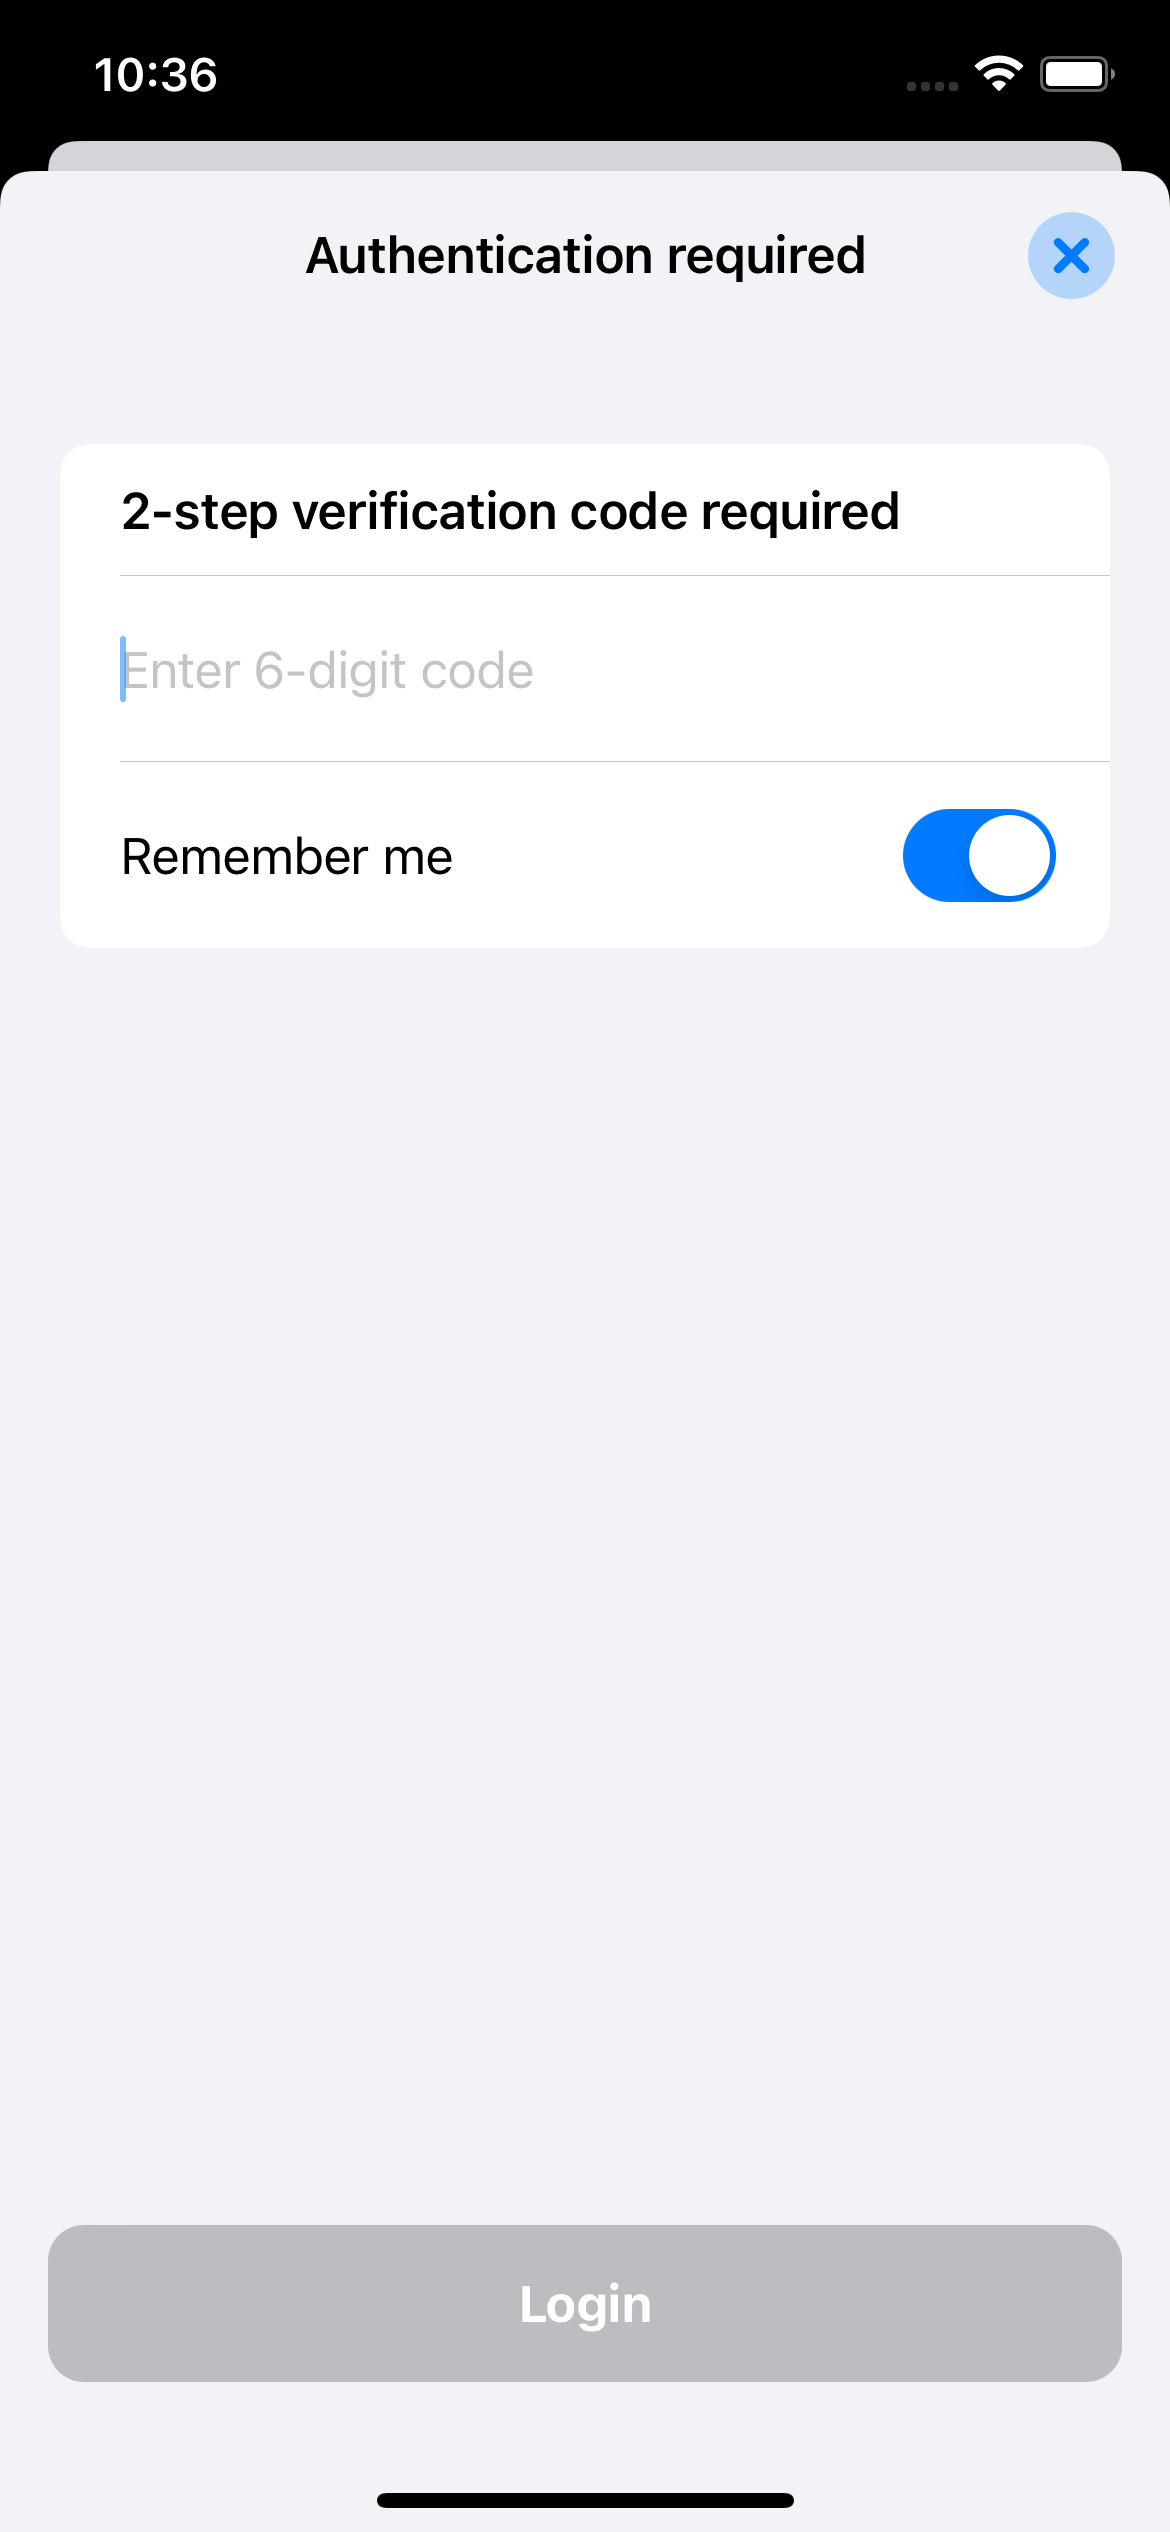 DS Manager Pro - v6 - iOS - Authentication requeired screen.png